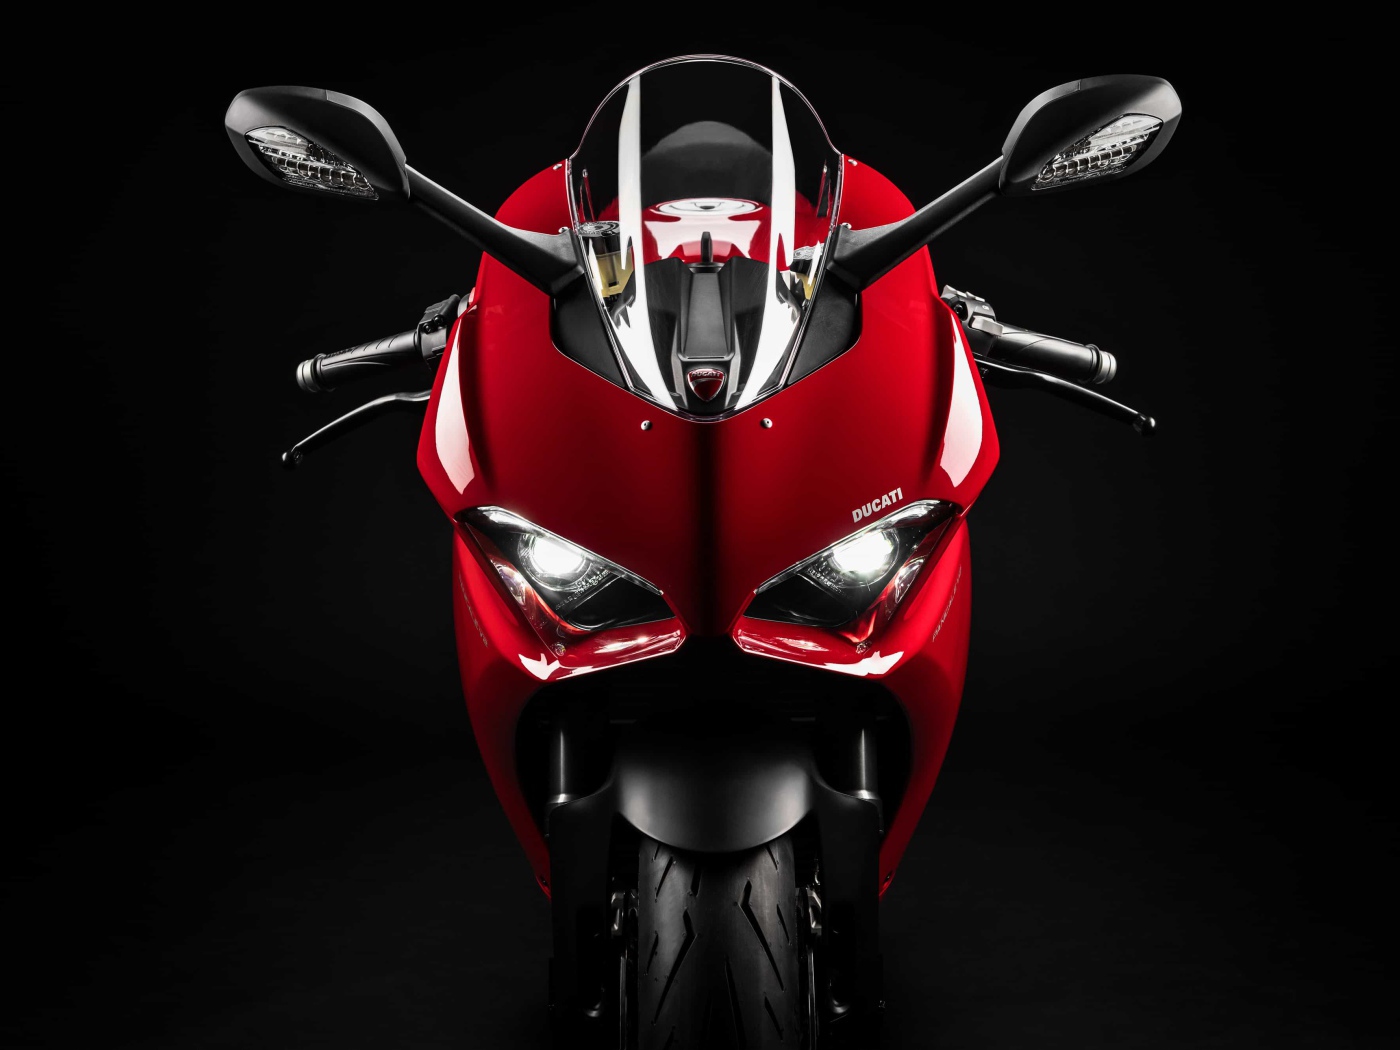 Red motorcycle Ducati Panigale v2 front view